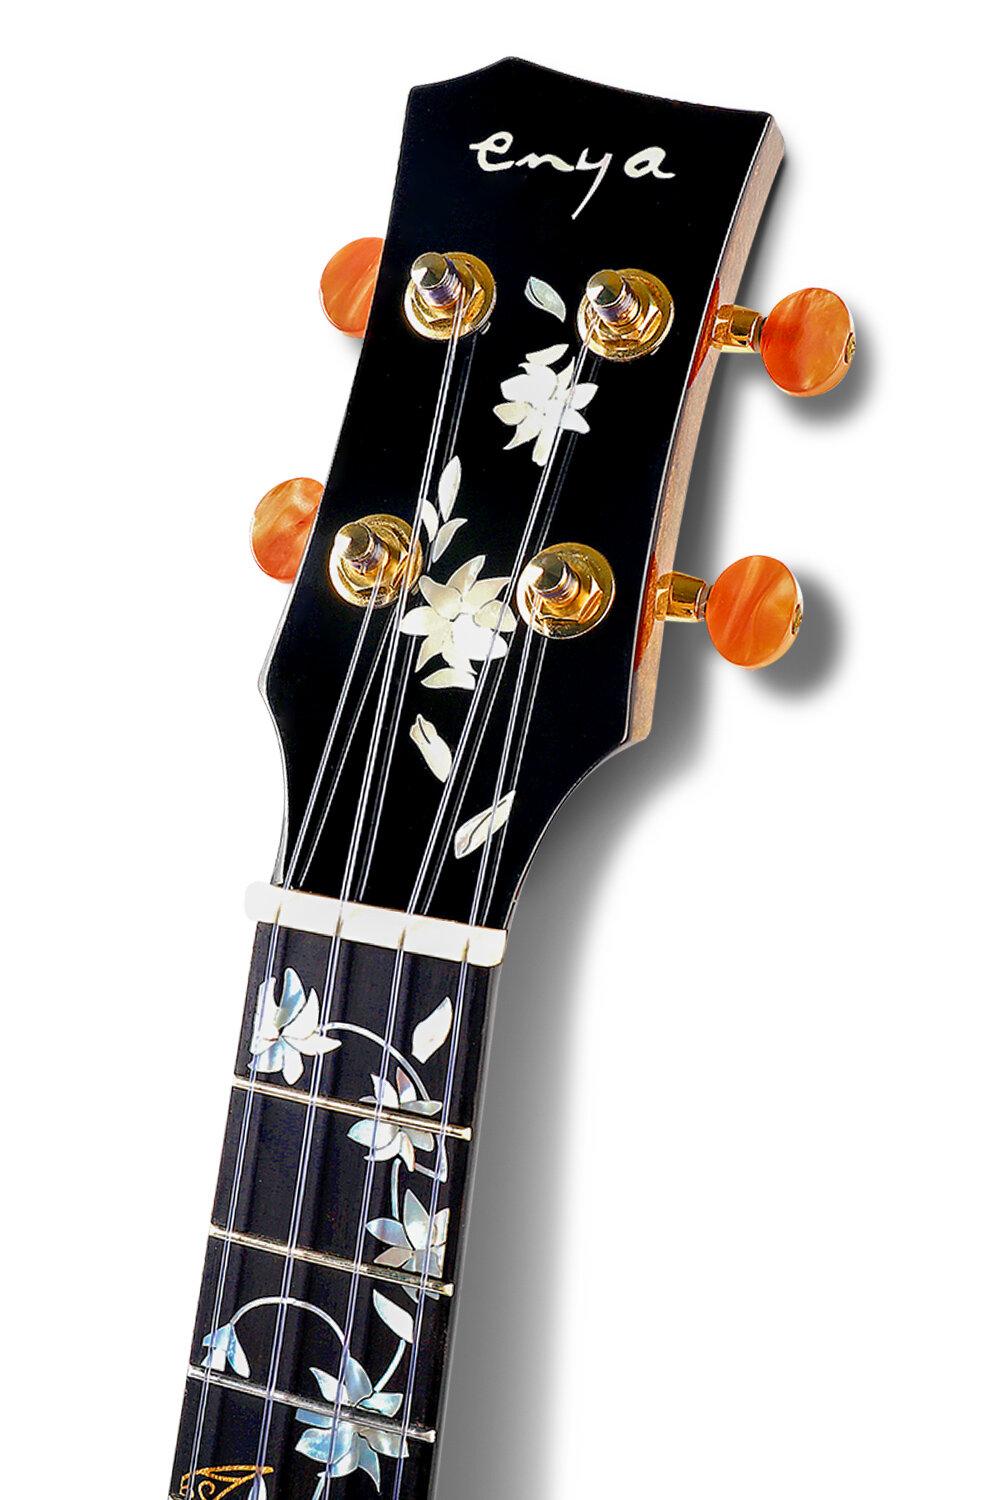 CNC headstock - The elite CNC cutting headstock is embedded in the top quality ebony with luxurious inlay, custom red agate gold 1:18 head machine ensuring constant stable sound performance.Perfect visual and auditory experience.